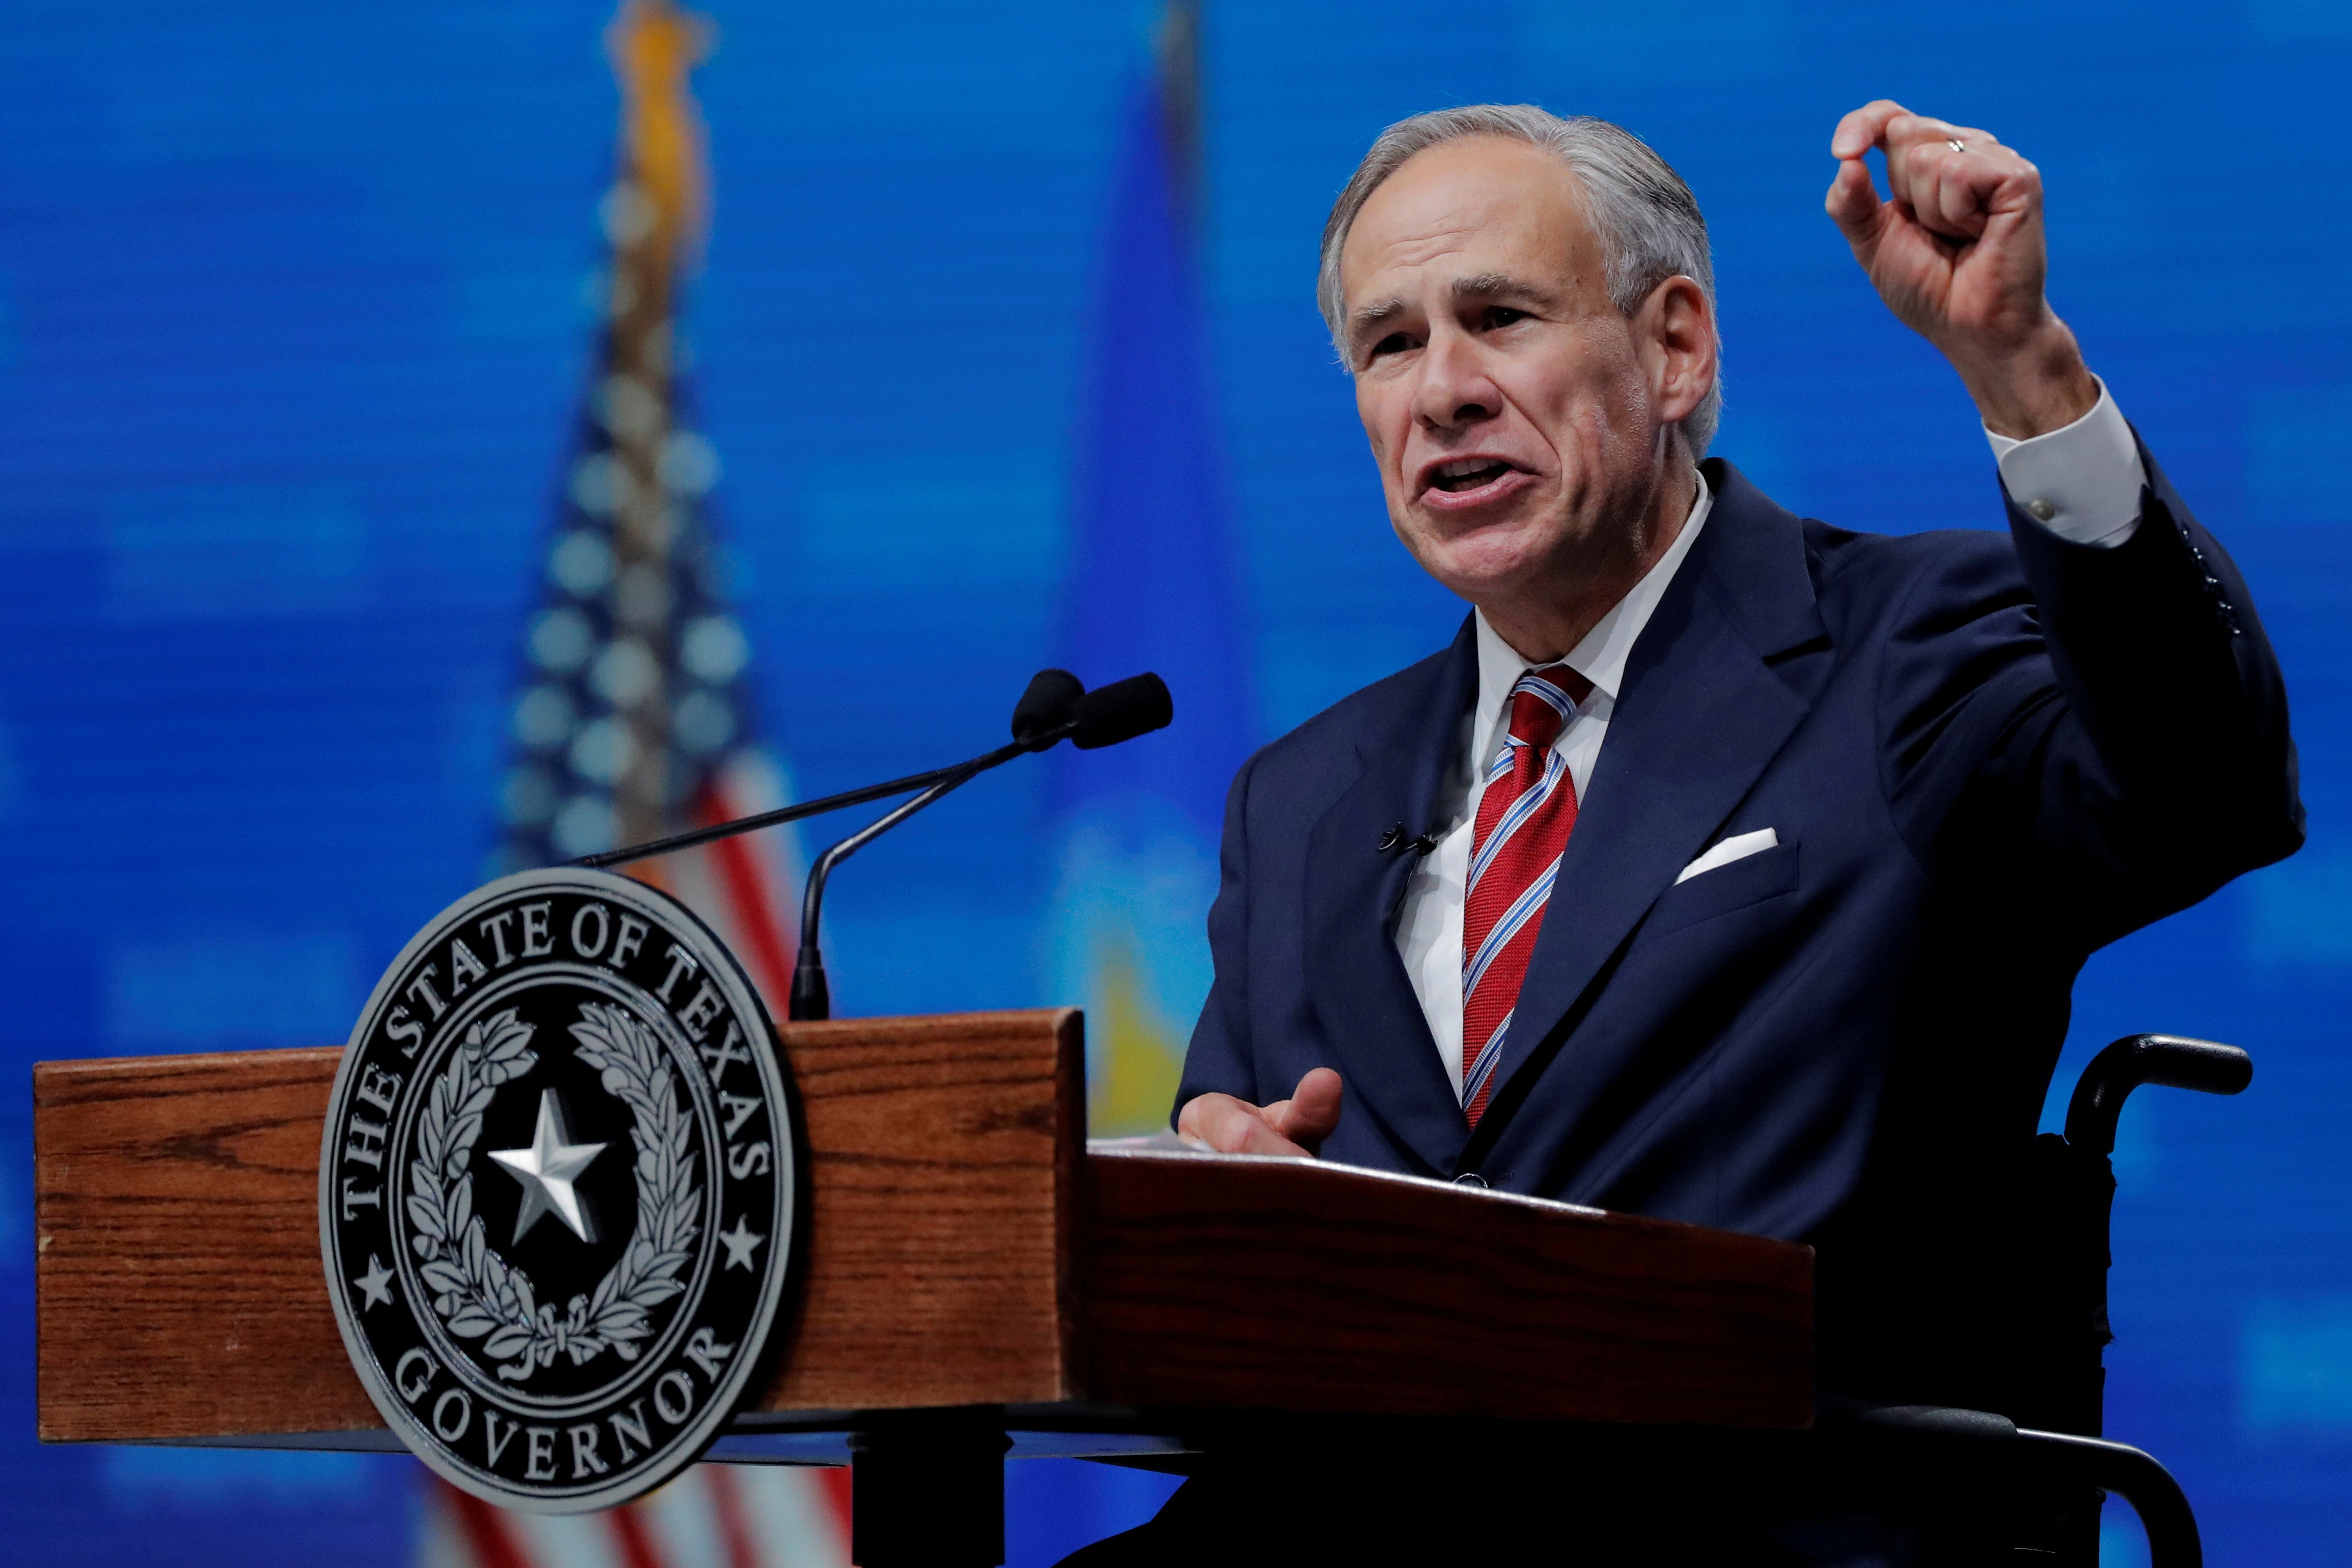 Greg Abbott gestures while speaking at a podium at a convention with an American flag in the background.